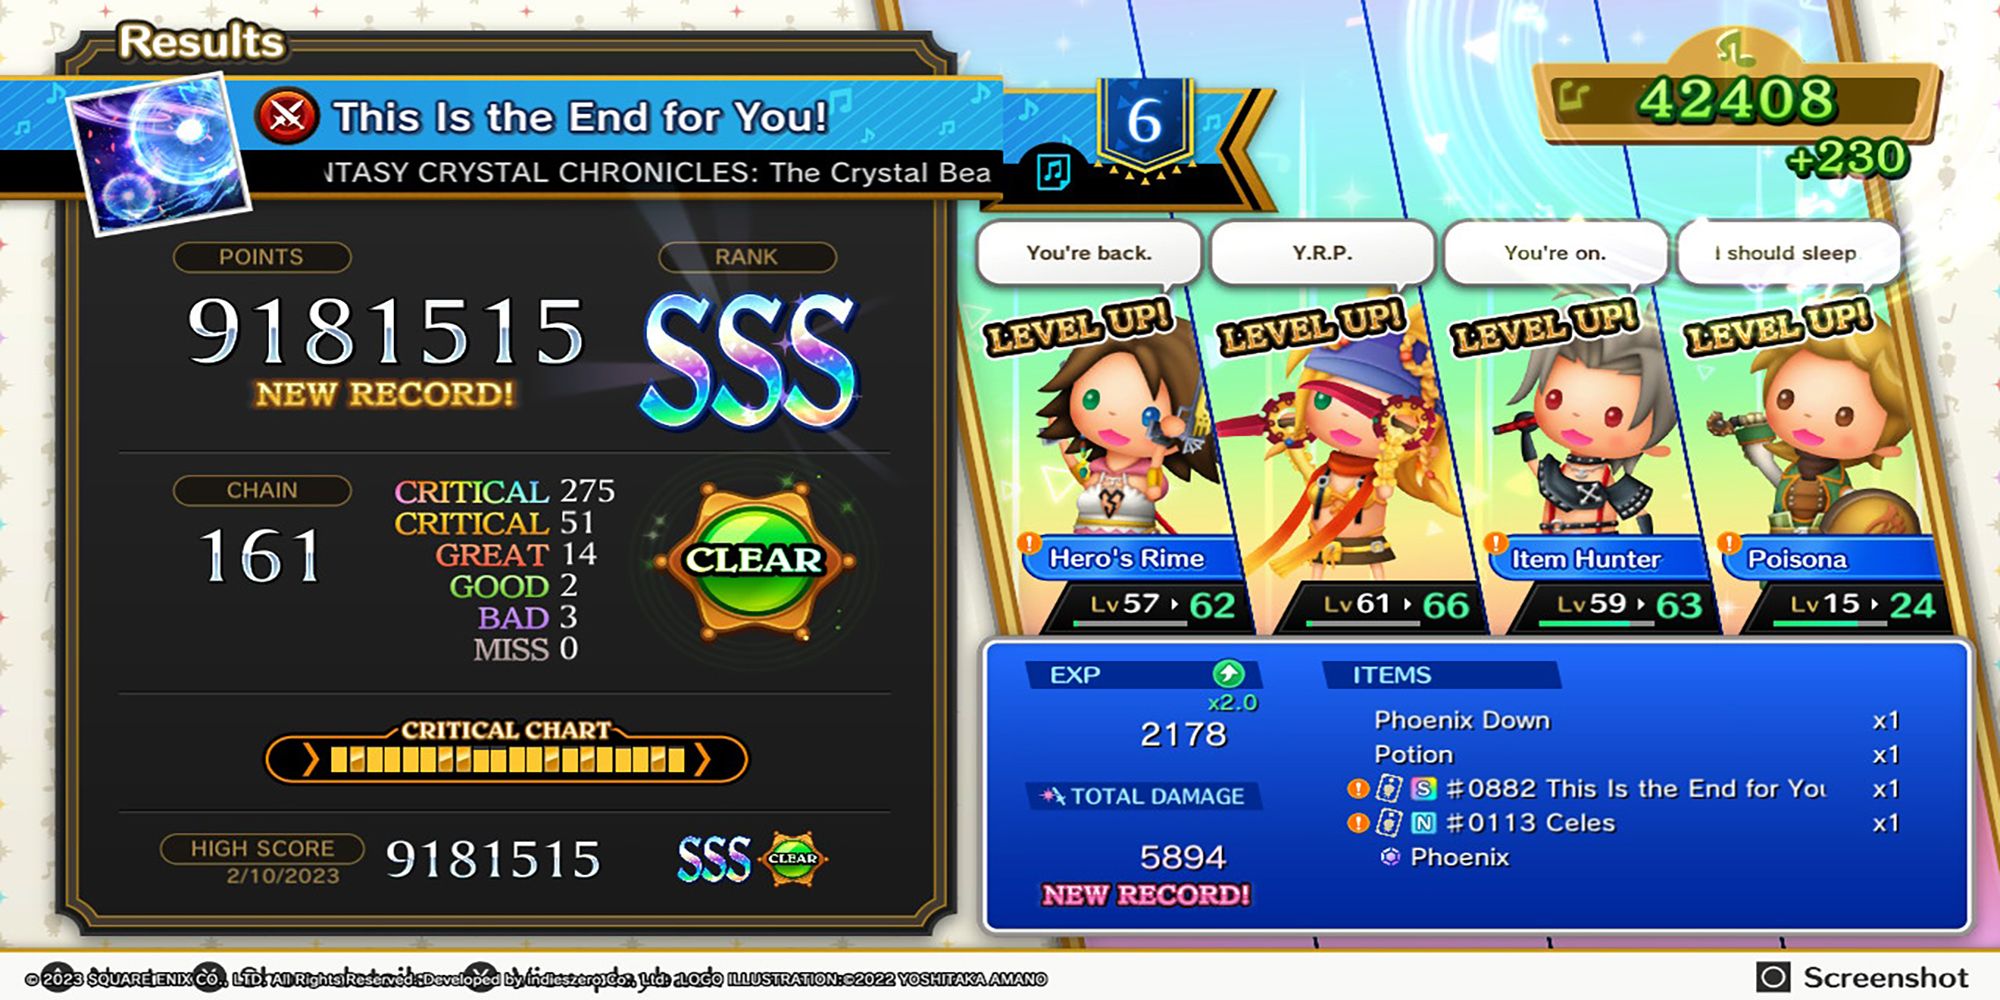 Yuna, Paine, and Ciaran jump for joy after learning new abilities in Theatrhythm: Final Bar Line.